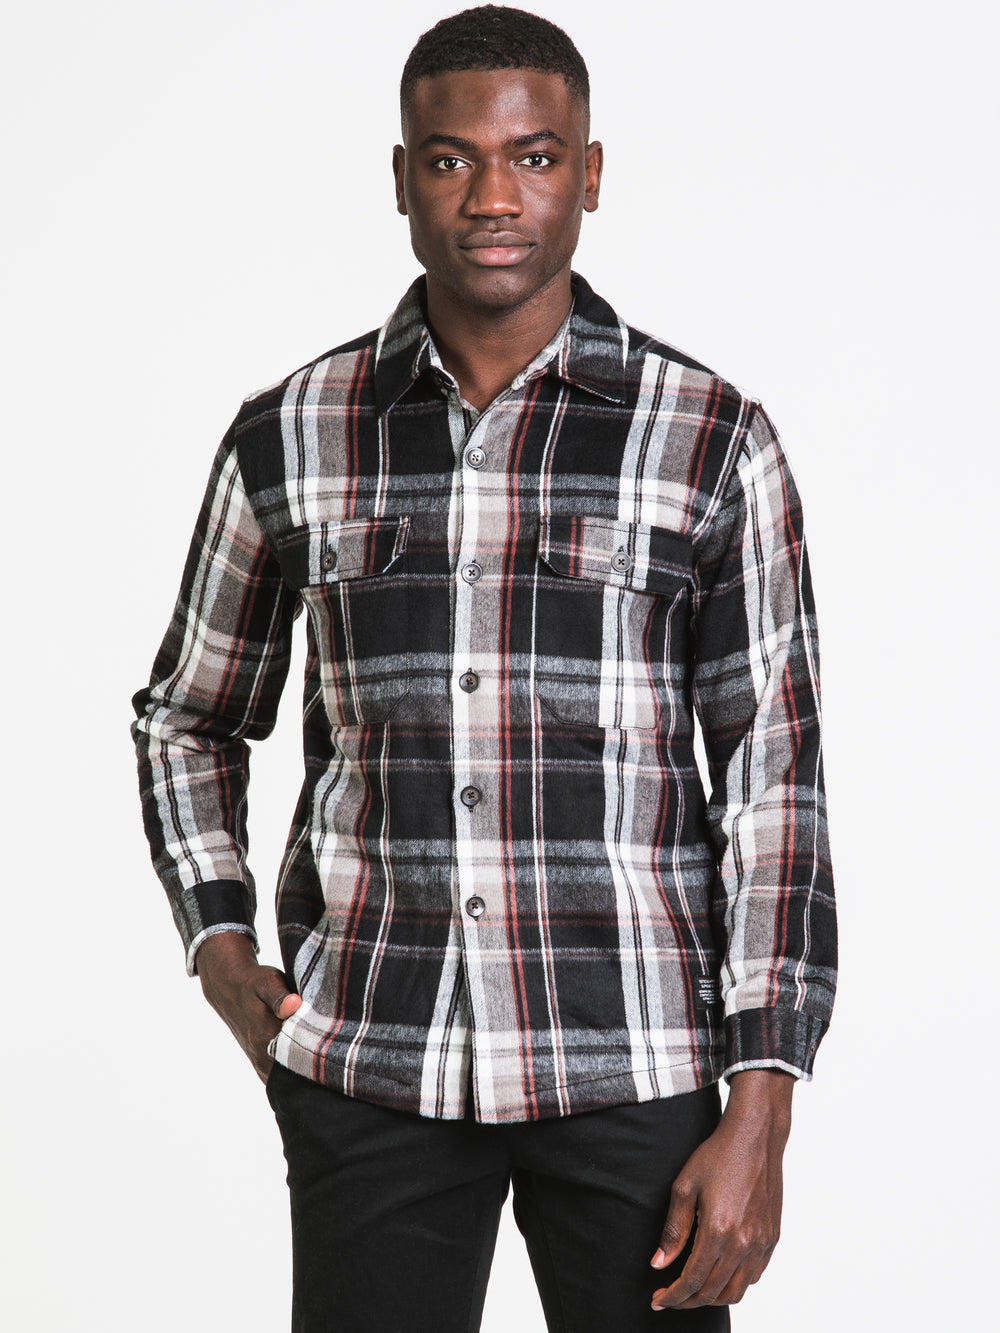 KOLBY TRAPPER OVERSHIRT - CLEARANCE